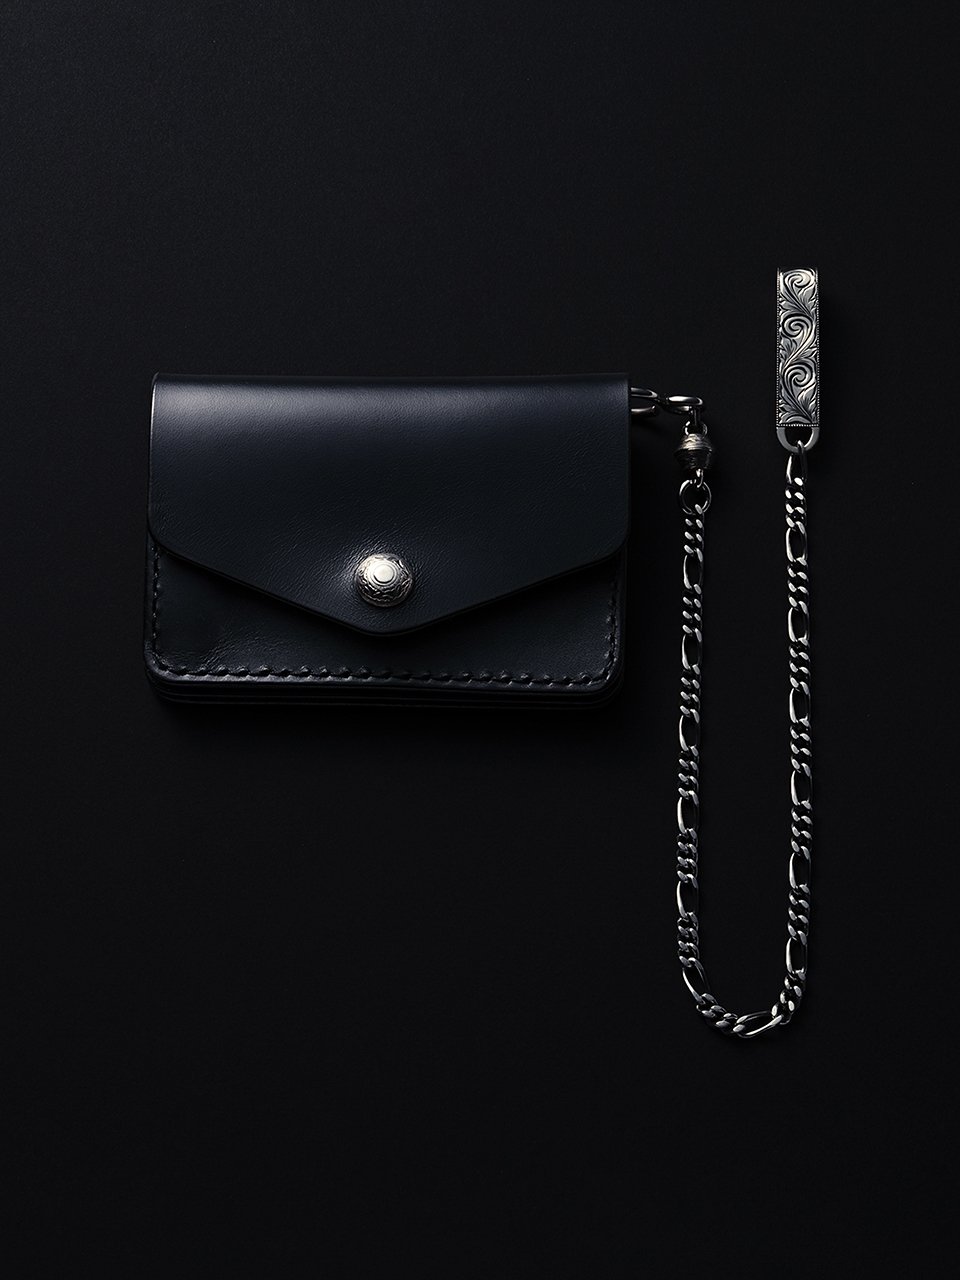 Antidote Buyers Club｜ウォレットチェーン Engraved Narrow Wallet 